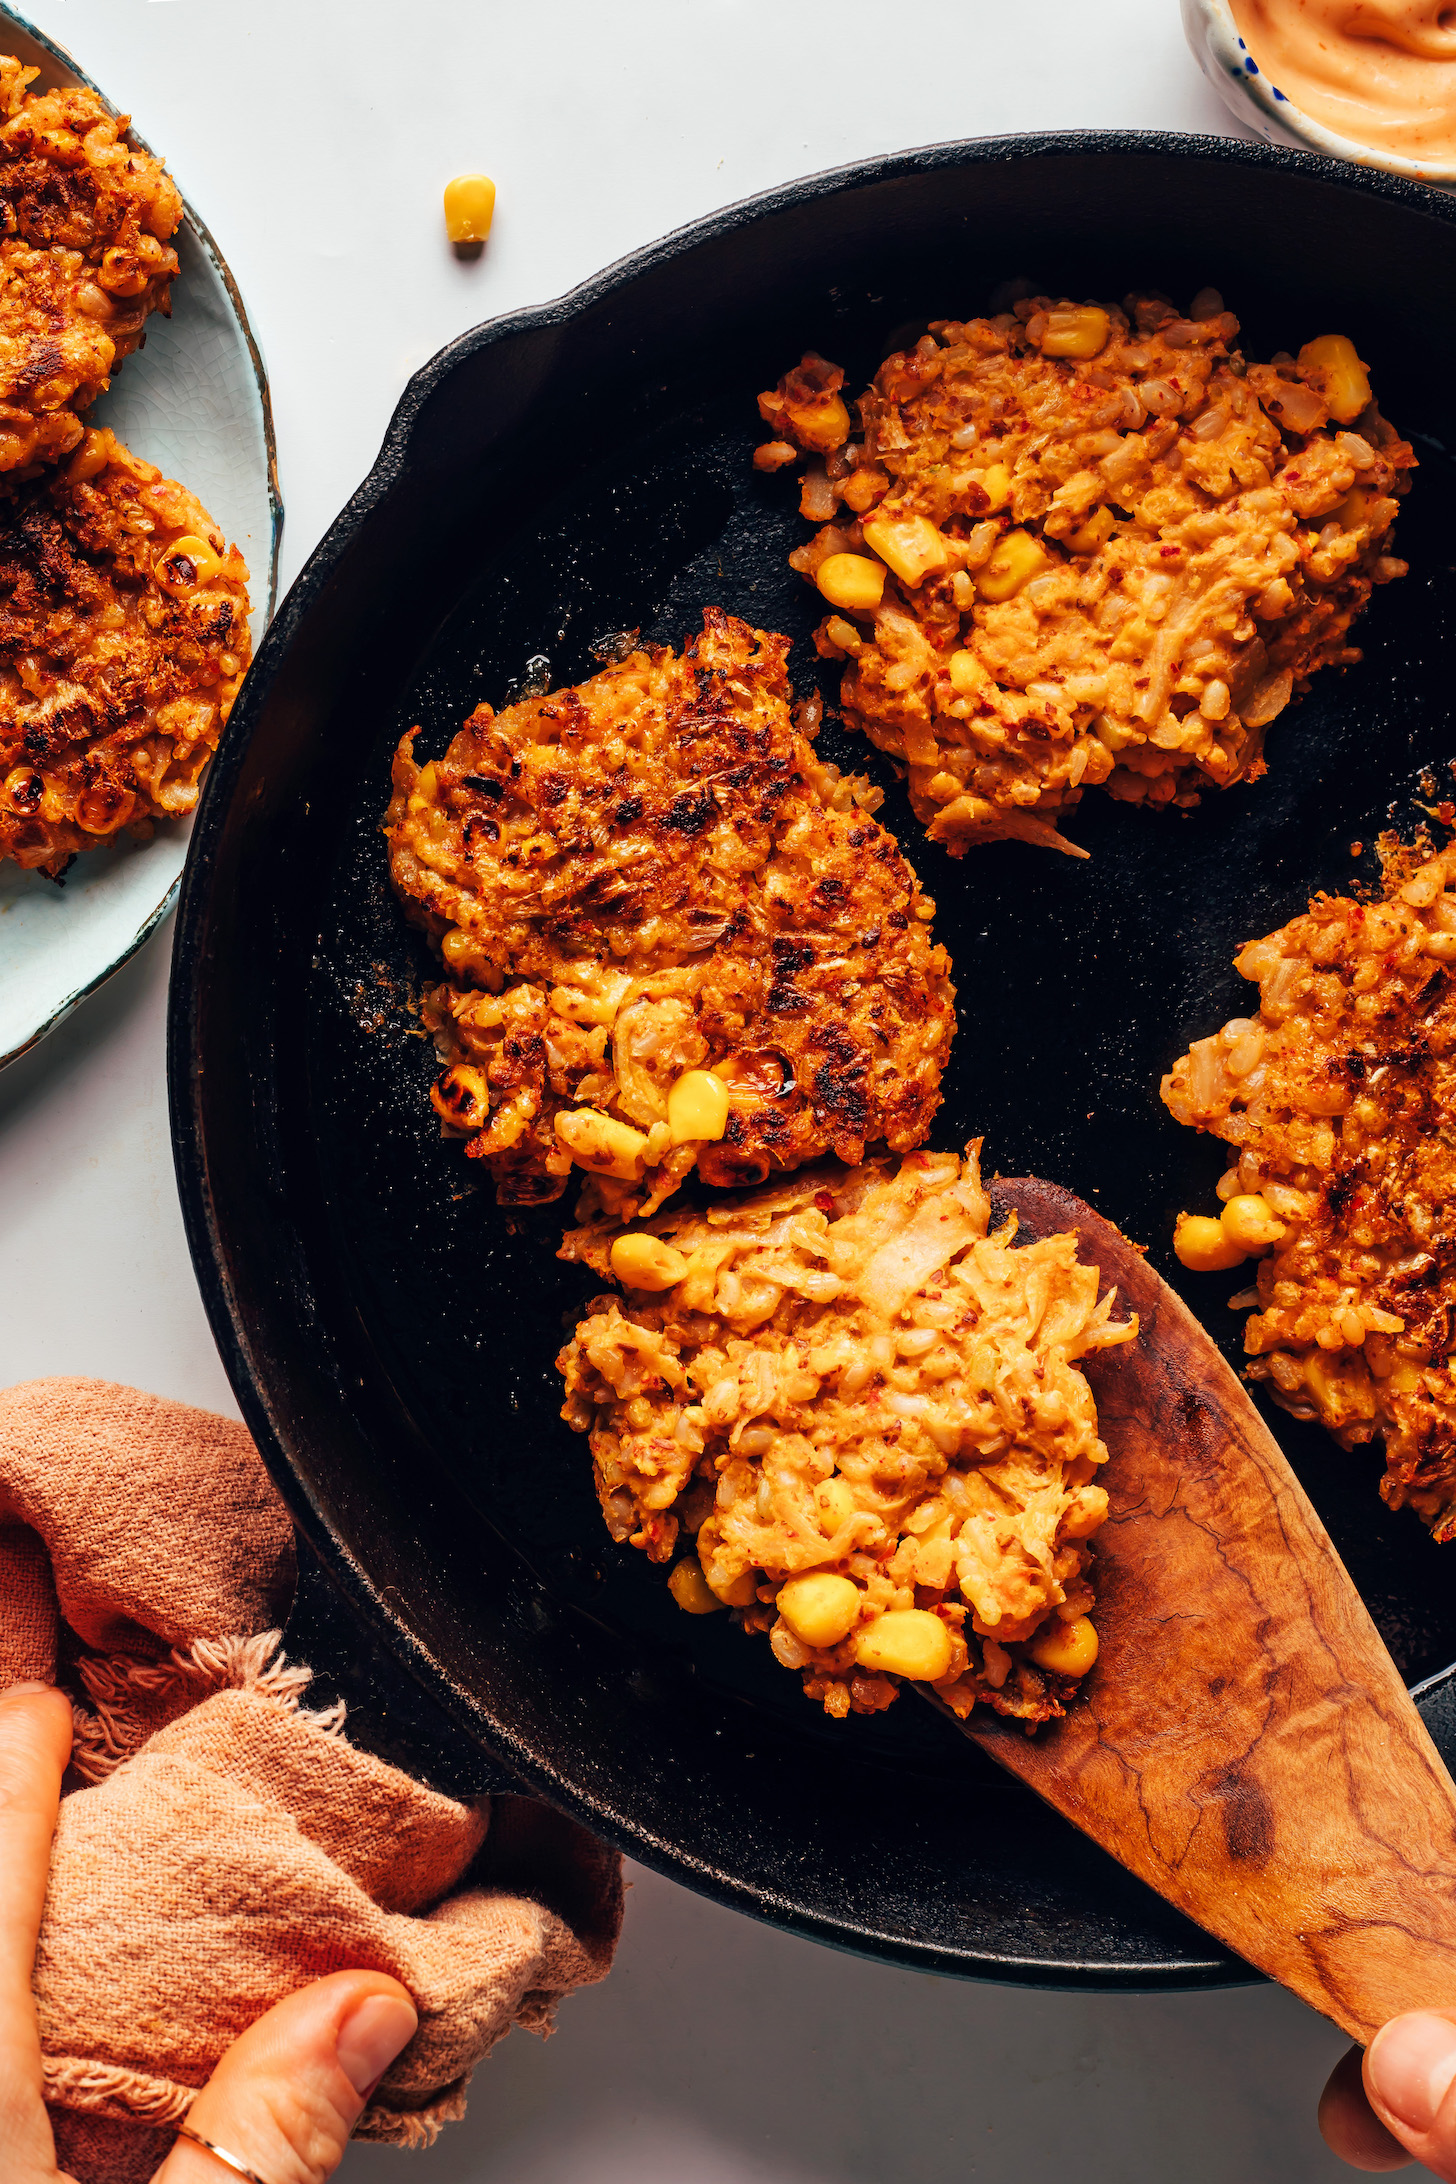 Cooking kimchi rice fritters in a cast iron skillet